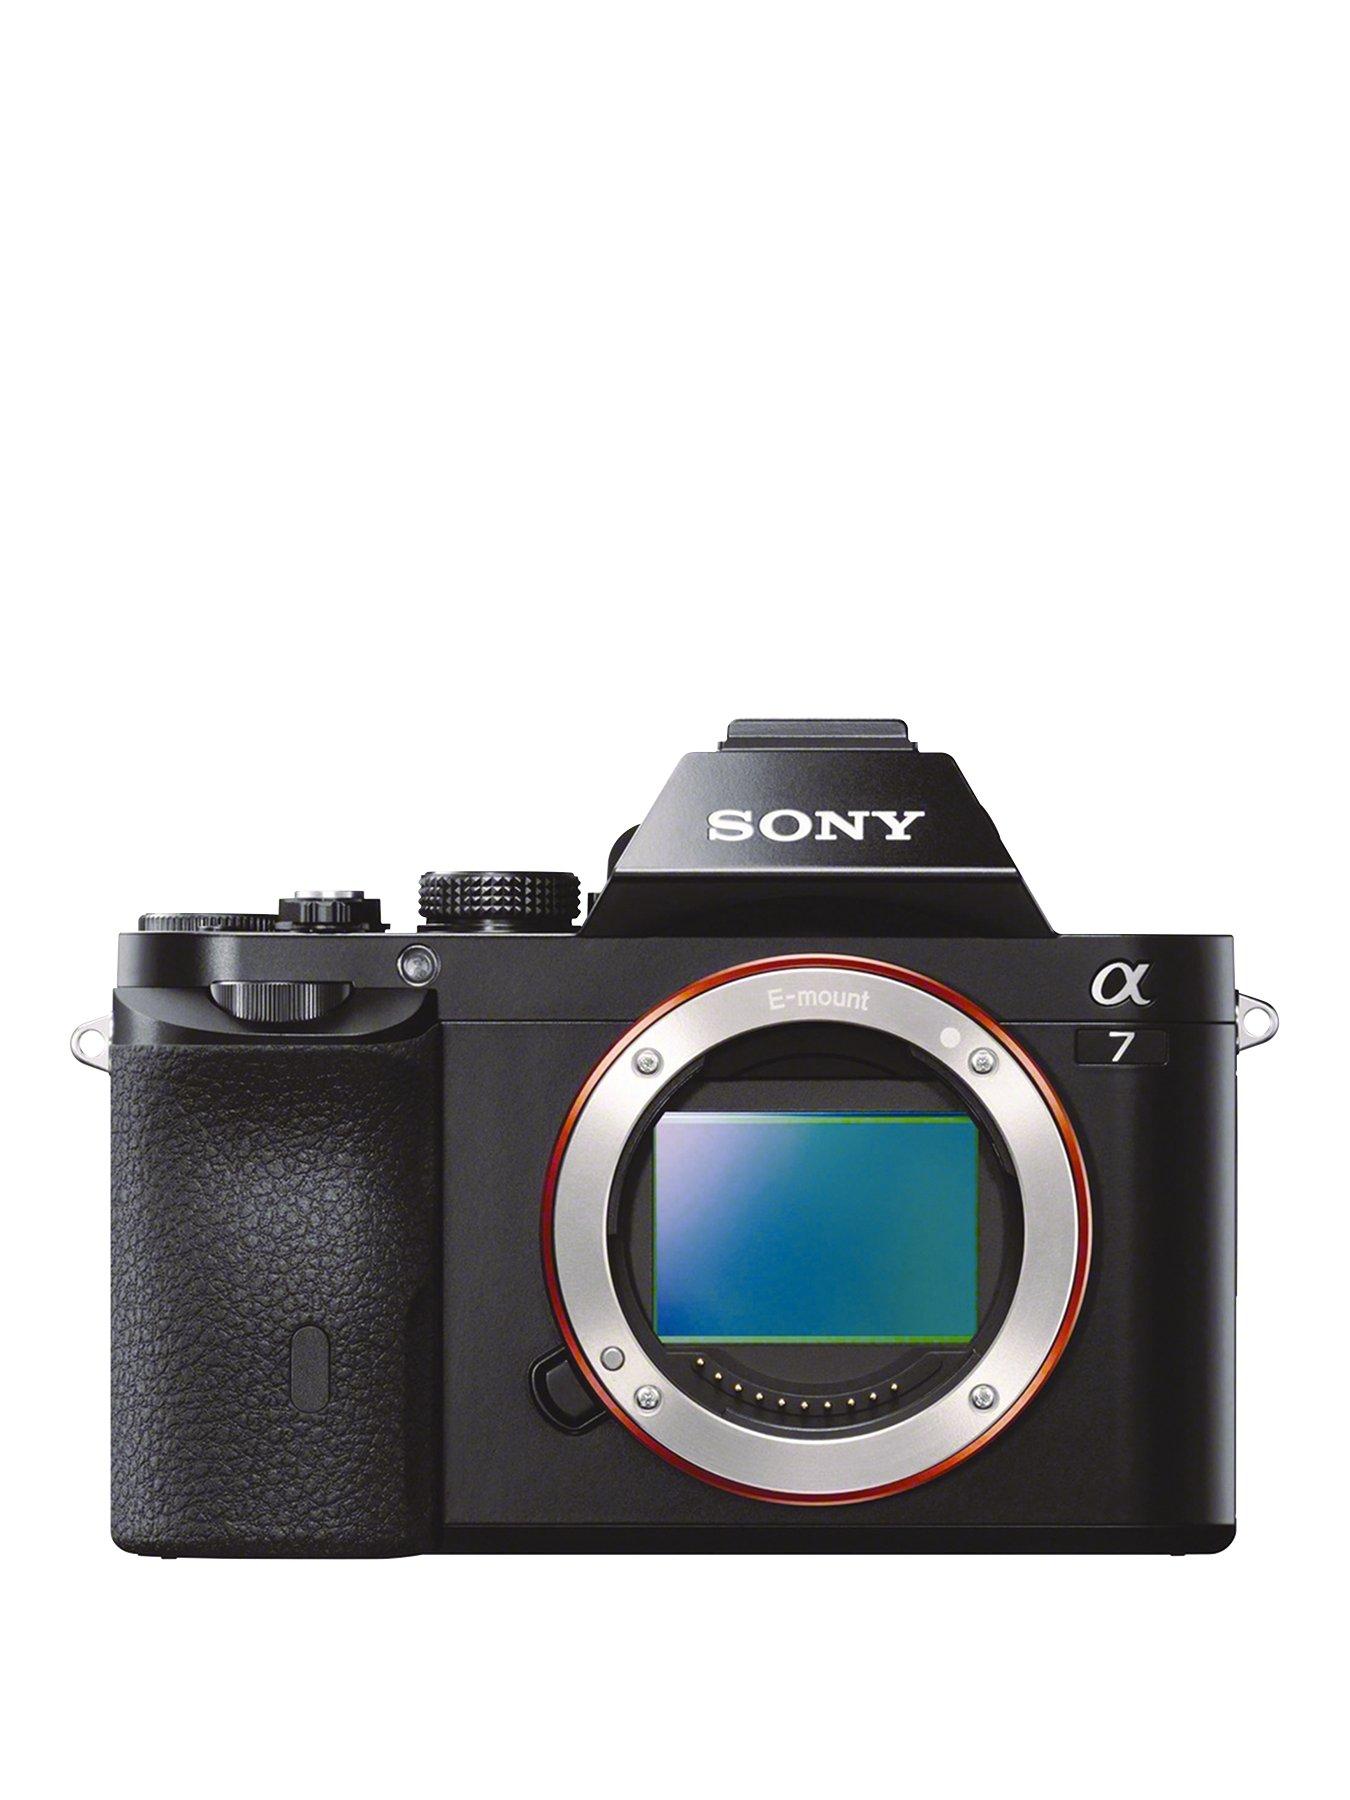 Sony A7 Compact System Camera With Full Frame Sensor – Body